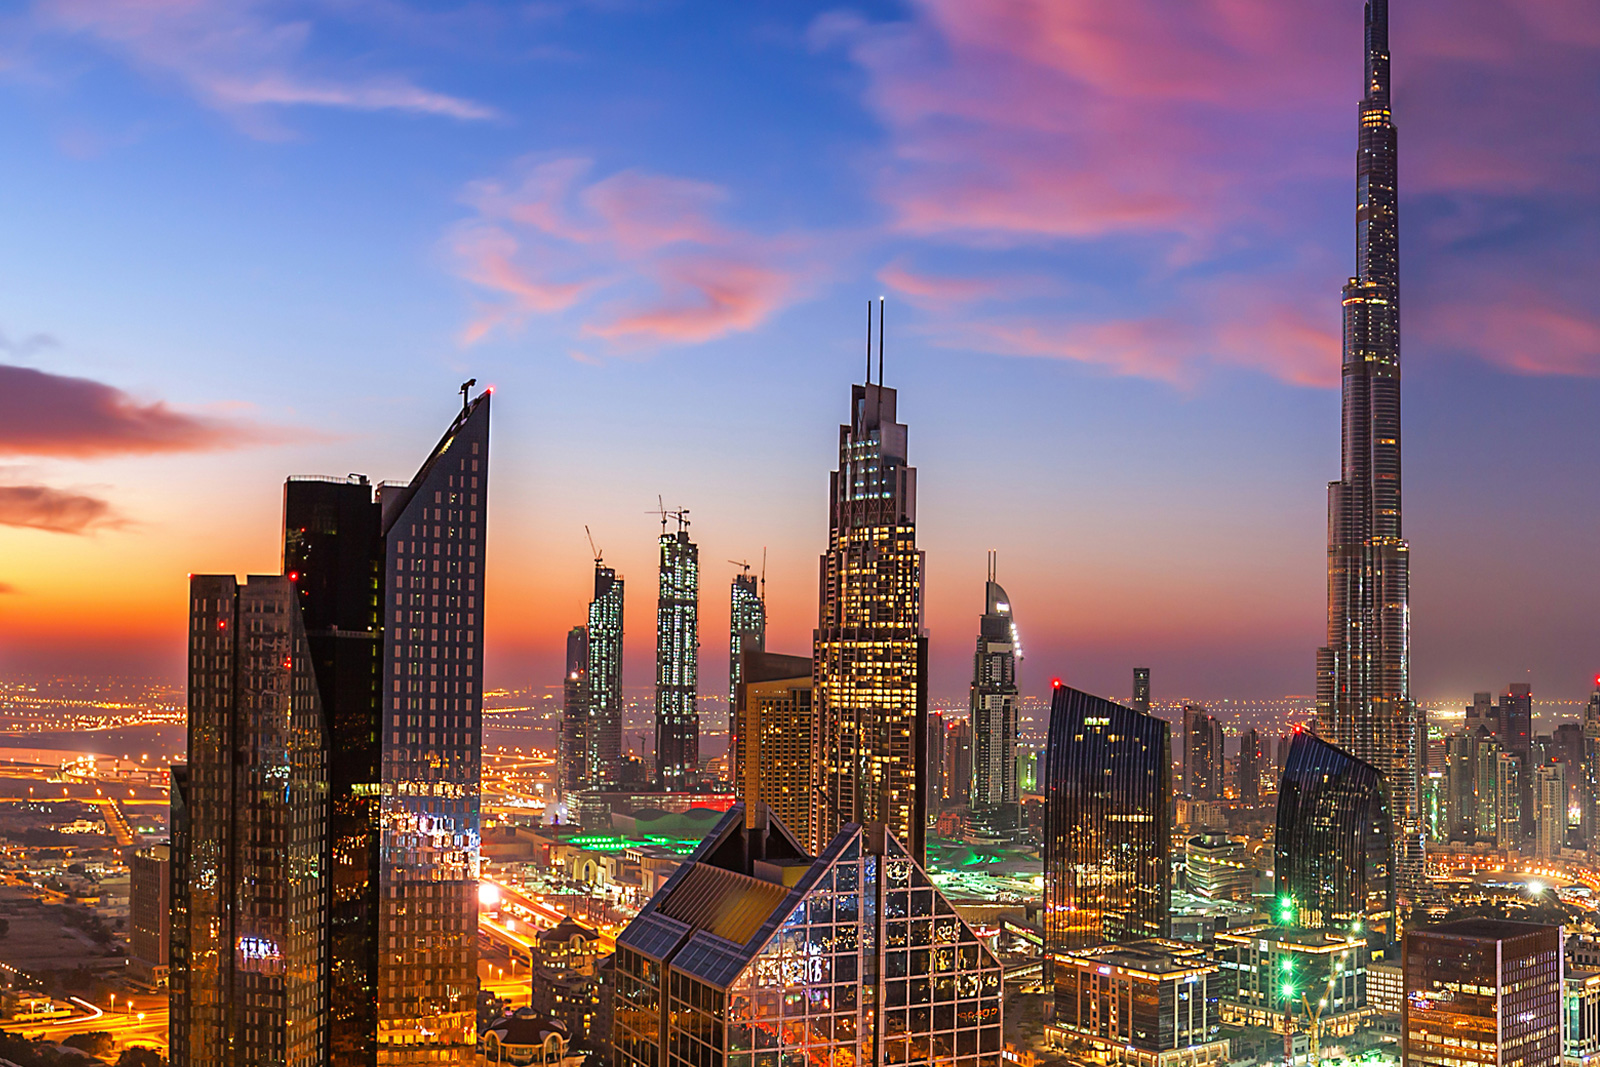 Top five places to visit in Dubai